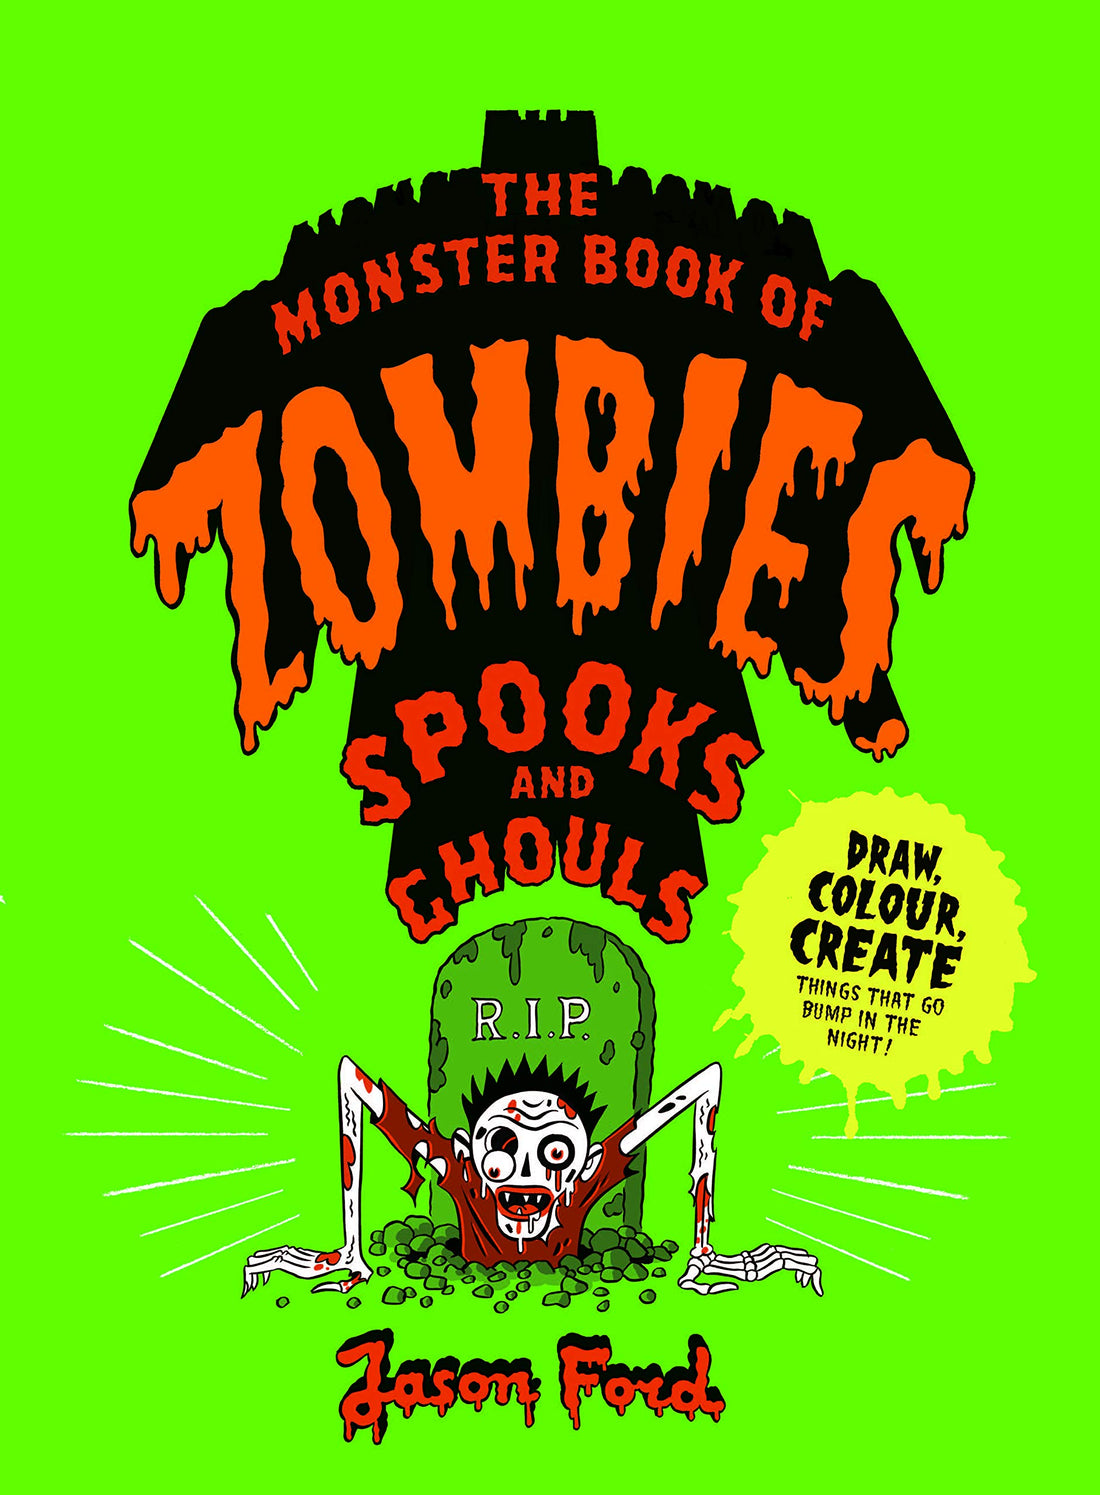 The Monster Book of Zombies, Spooks and Ghouls - Parkette.